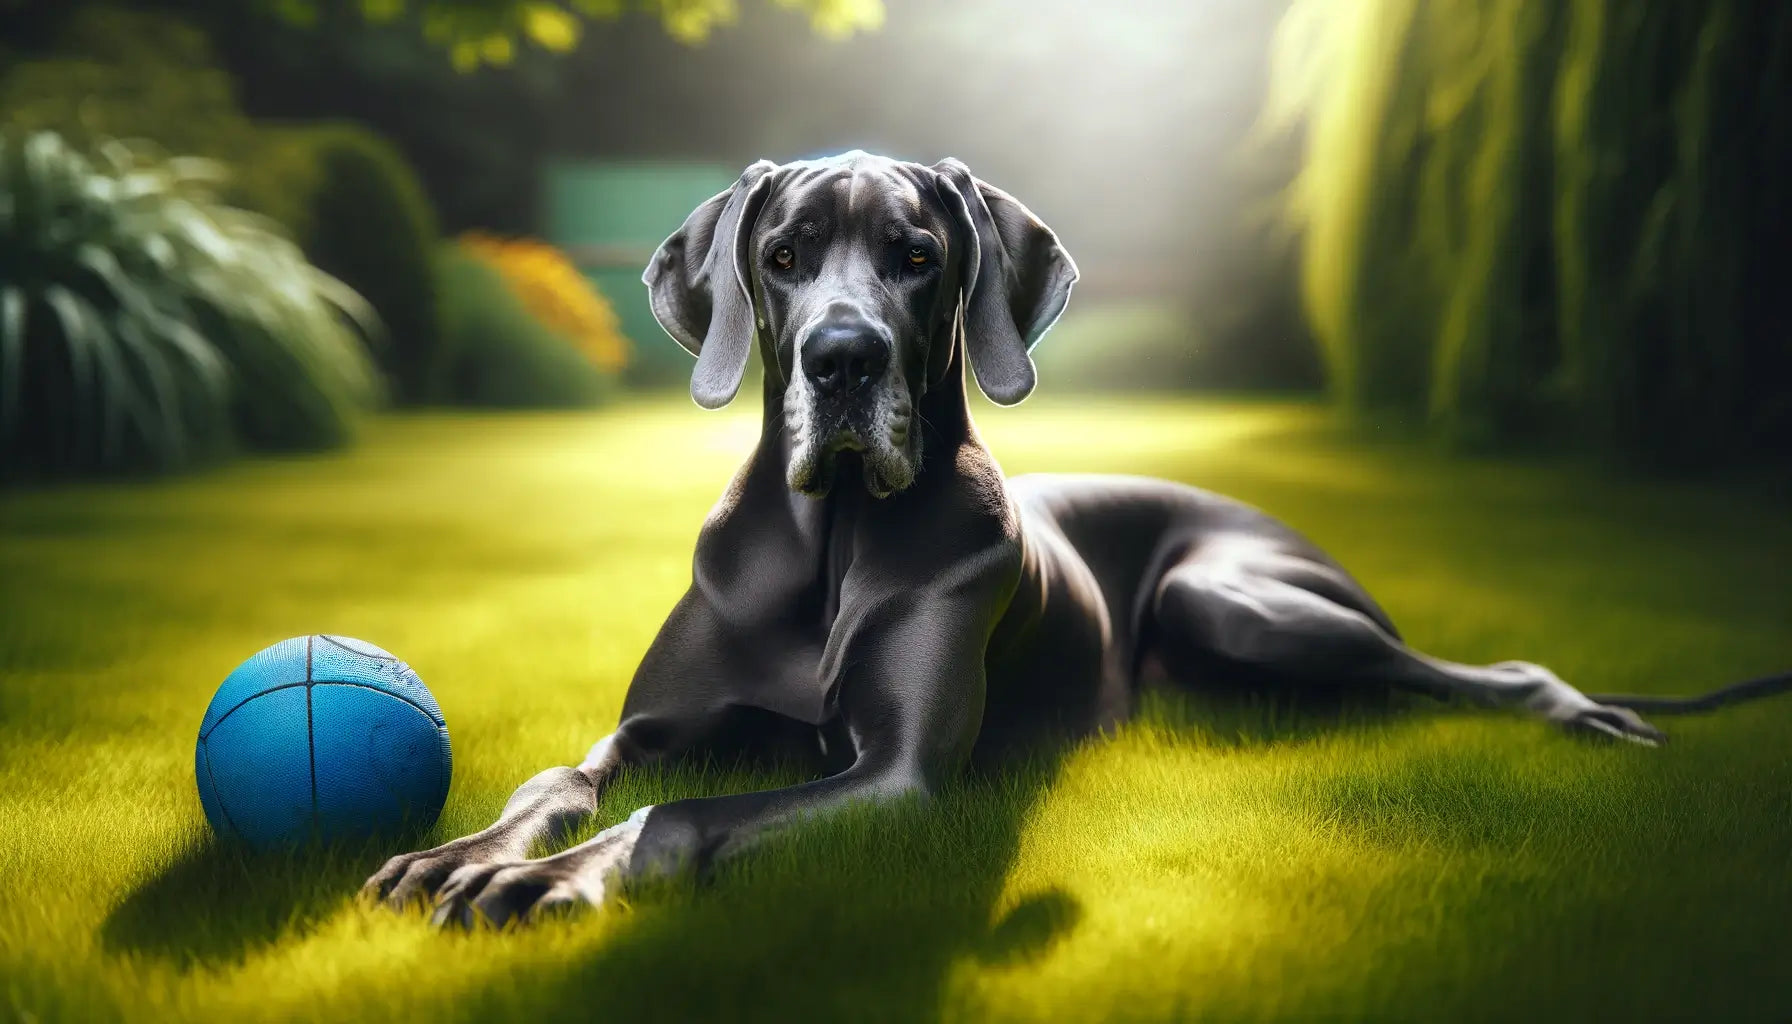 Blue Great Dane lying on grass, relaxed and content with a ball nearby, signaling its playful and active nature.